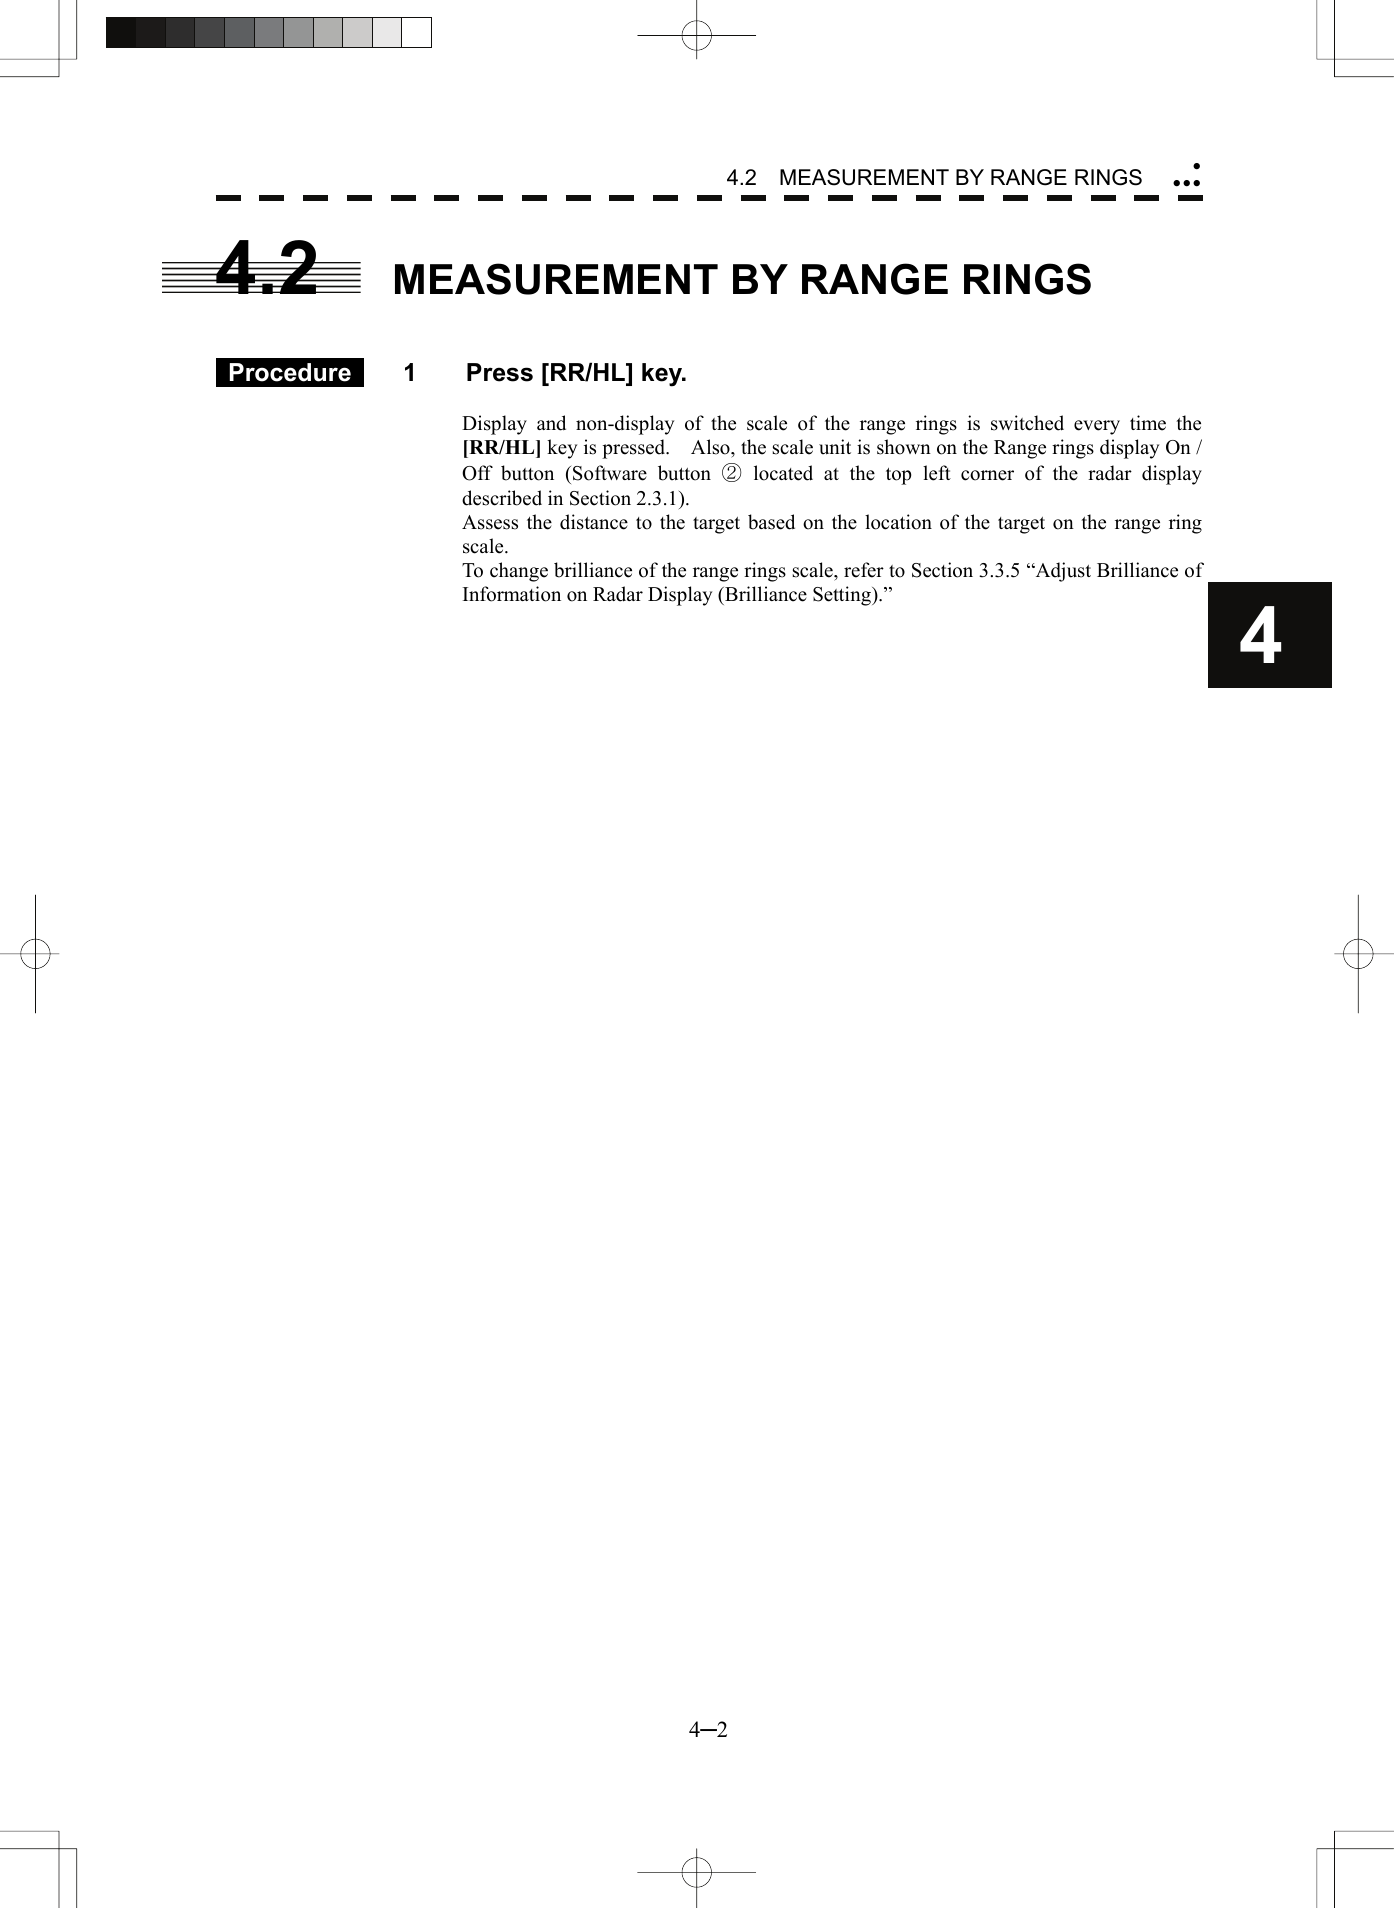 4.2  MEASUREMENT BY RANGE RINGS 4─2 4  yyyy4.2  MEASUREMENT BY RANGE RINGS    Procedure   1  Press [RR/HL] key.  Display and non-display of the scale of the range rings is switched every time the [RR/HL] key is pressed.    Also, the scale unit is shown on the Range rings display On / Off button (Software button ② located at the top left corner of the radar display described in Section 2.3.1). Assess the distance to the target based on the location of the target on the range ring scale. To change brilliance of the range rings scale, refer to Section 3.3.5 “Adjust Brilliance of Information on Radar Display (Brilliance Setting).”  